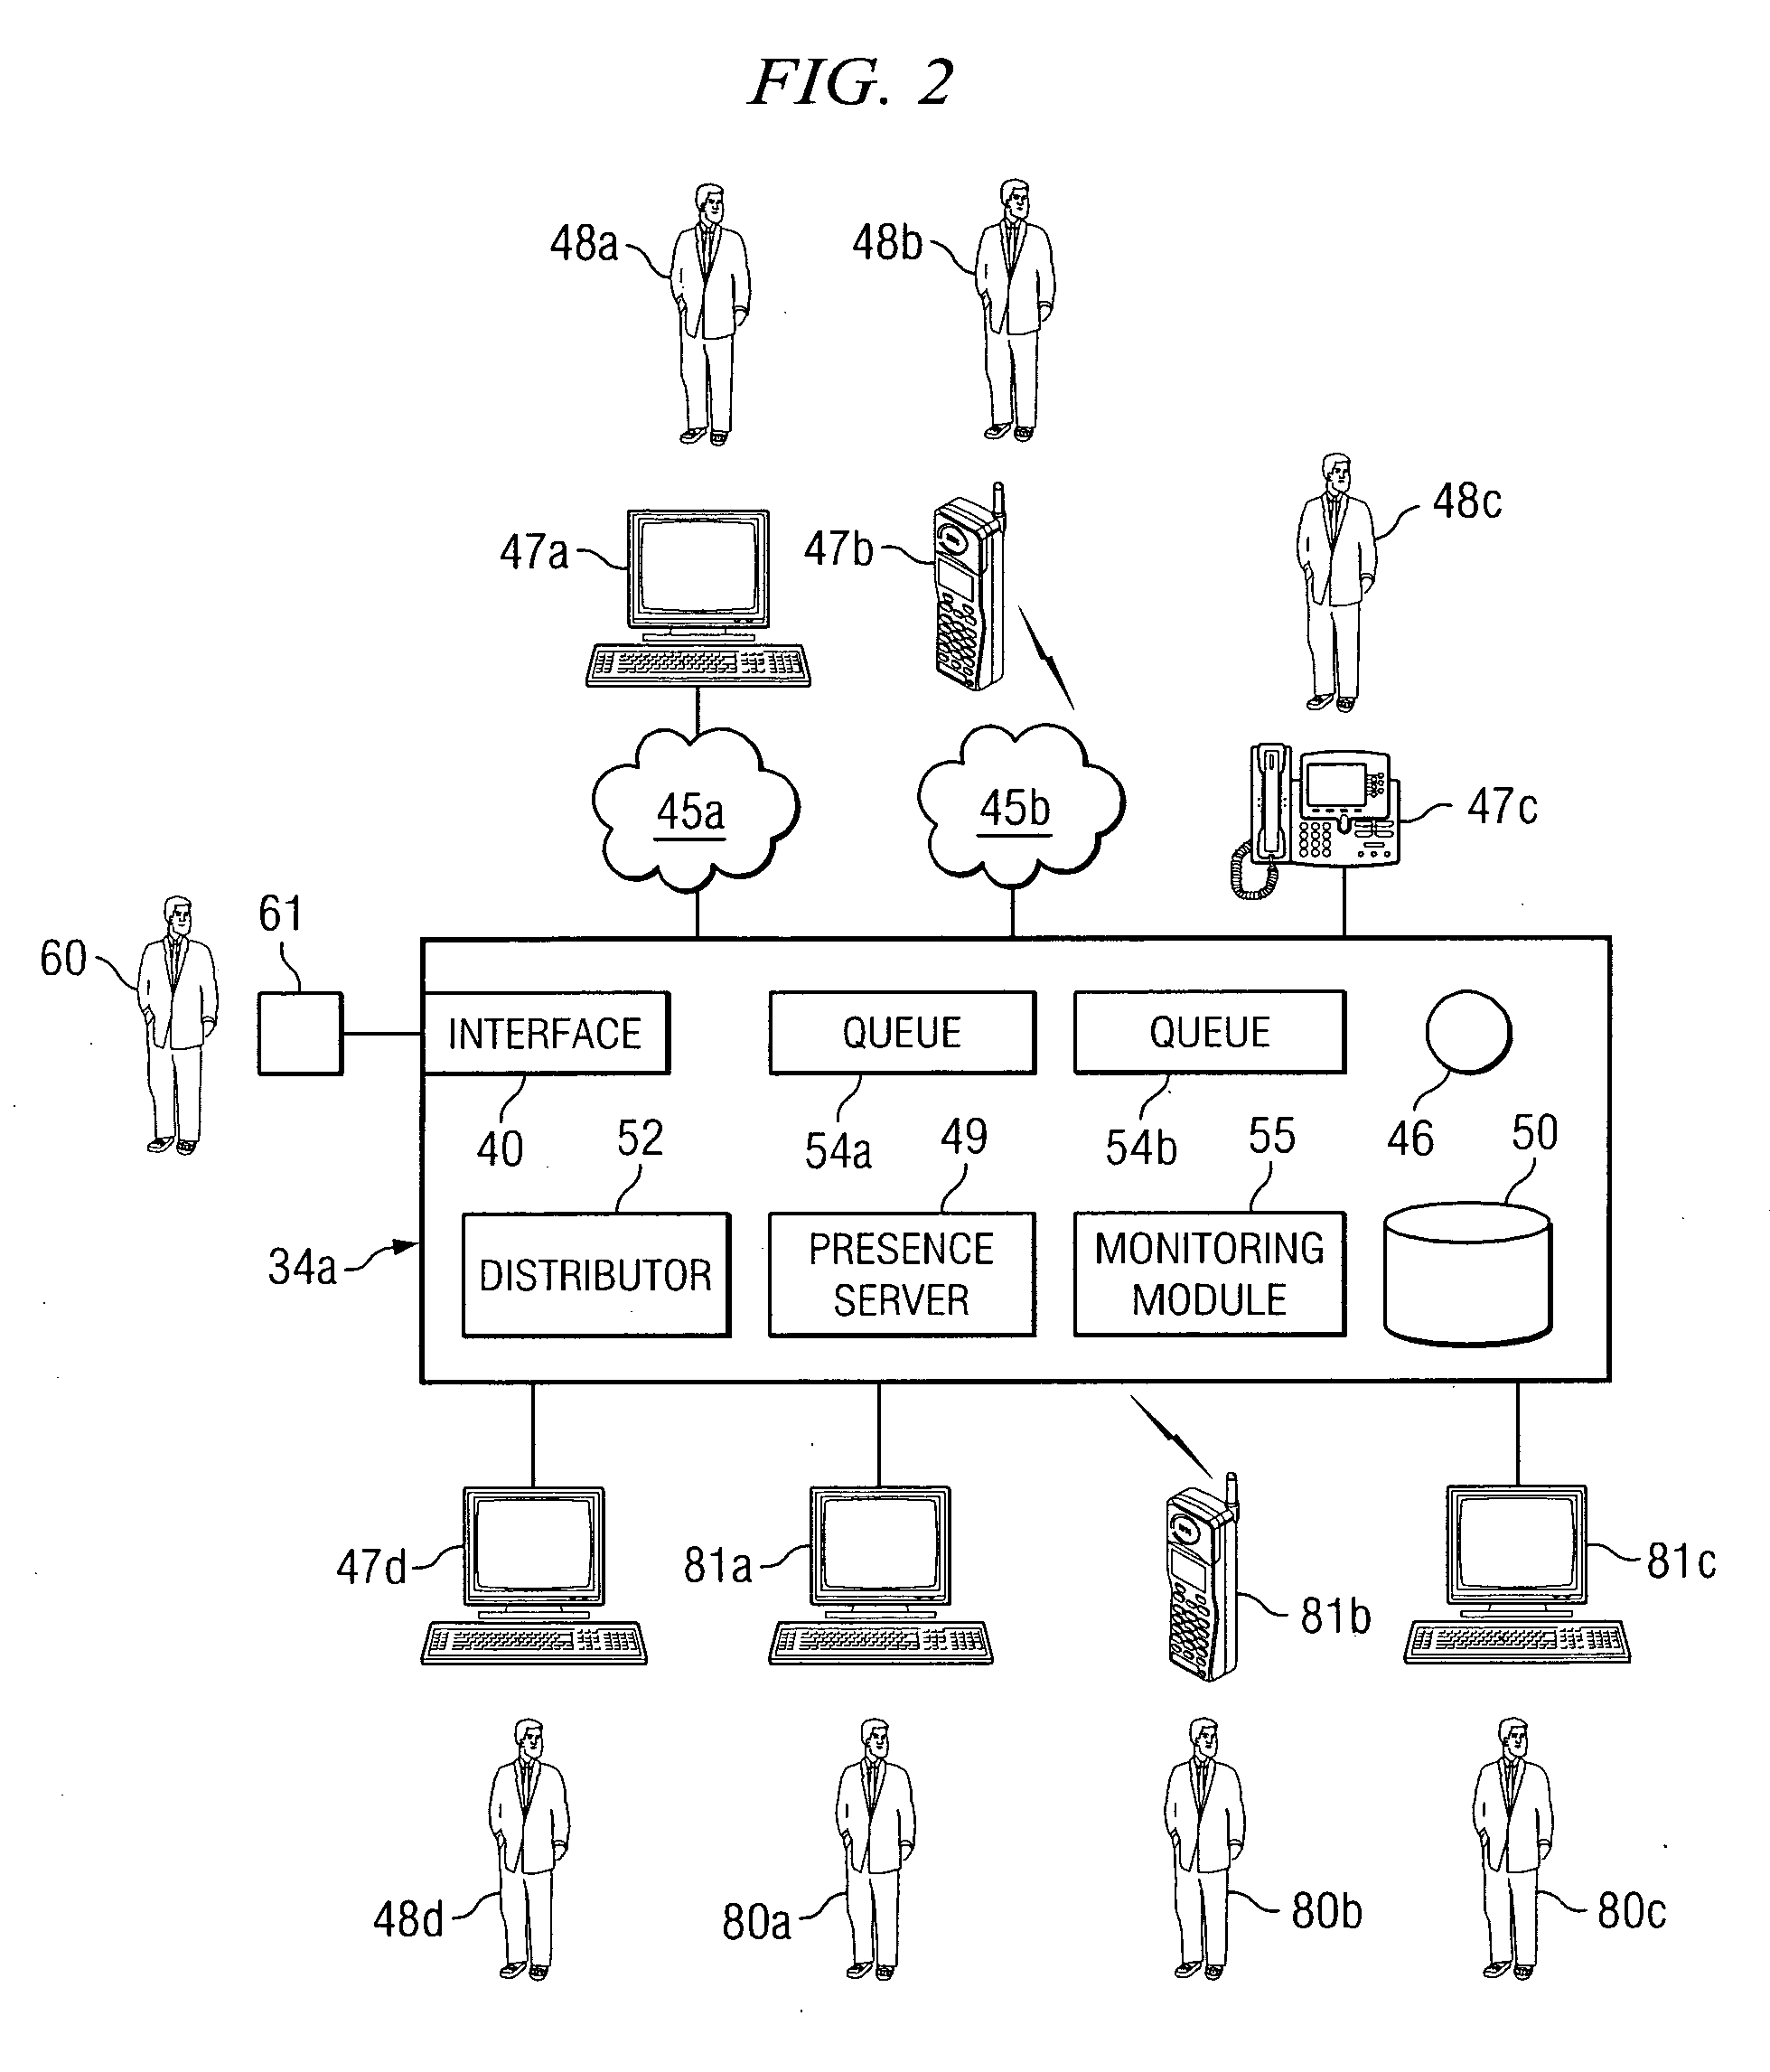 Method and system for transferring an automatic call distributor call